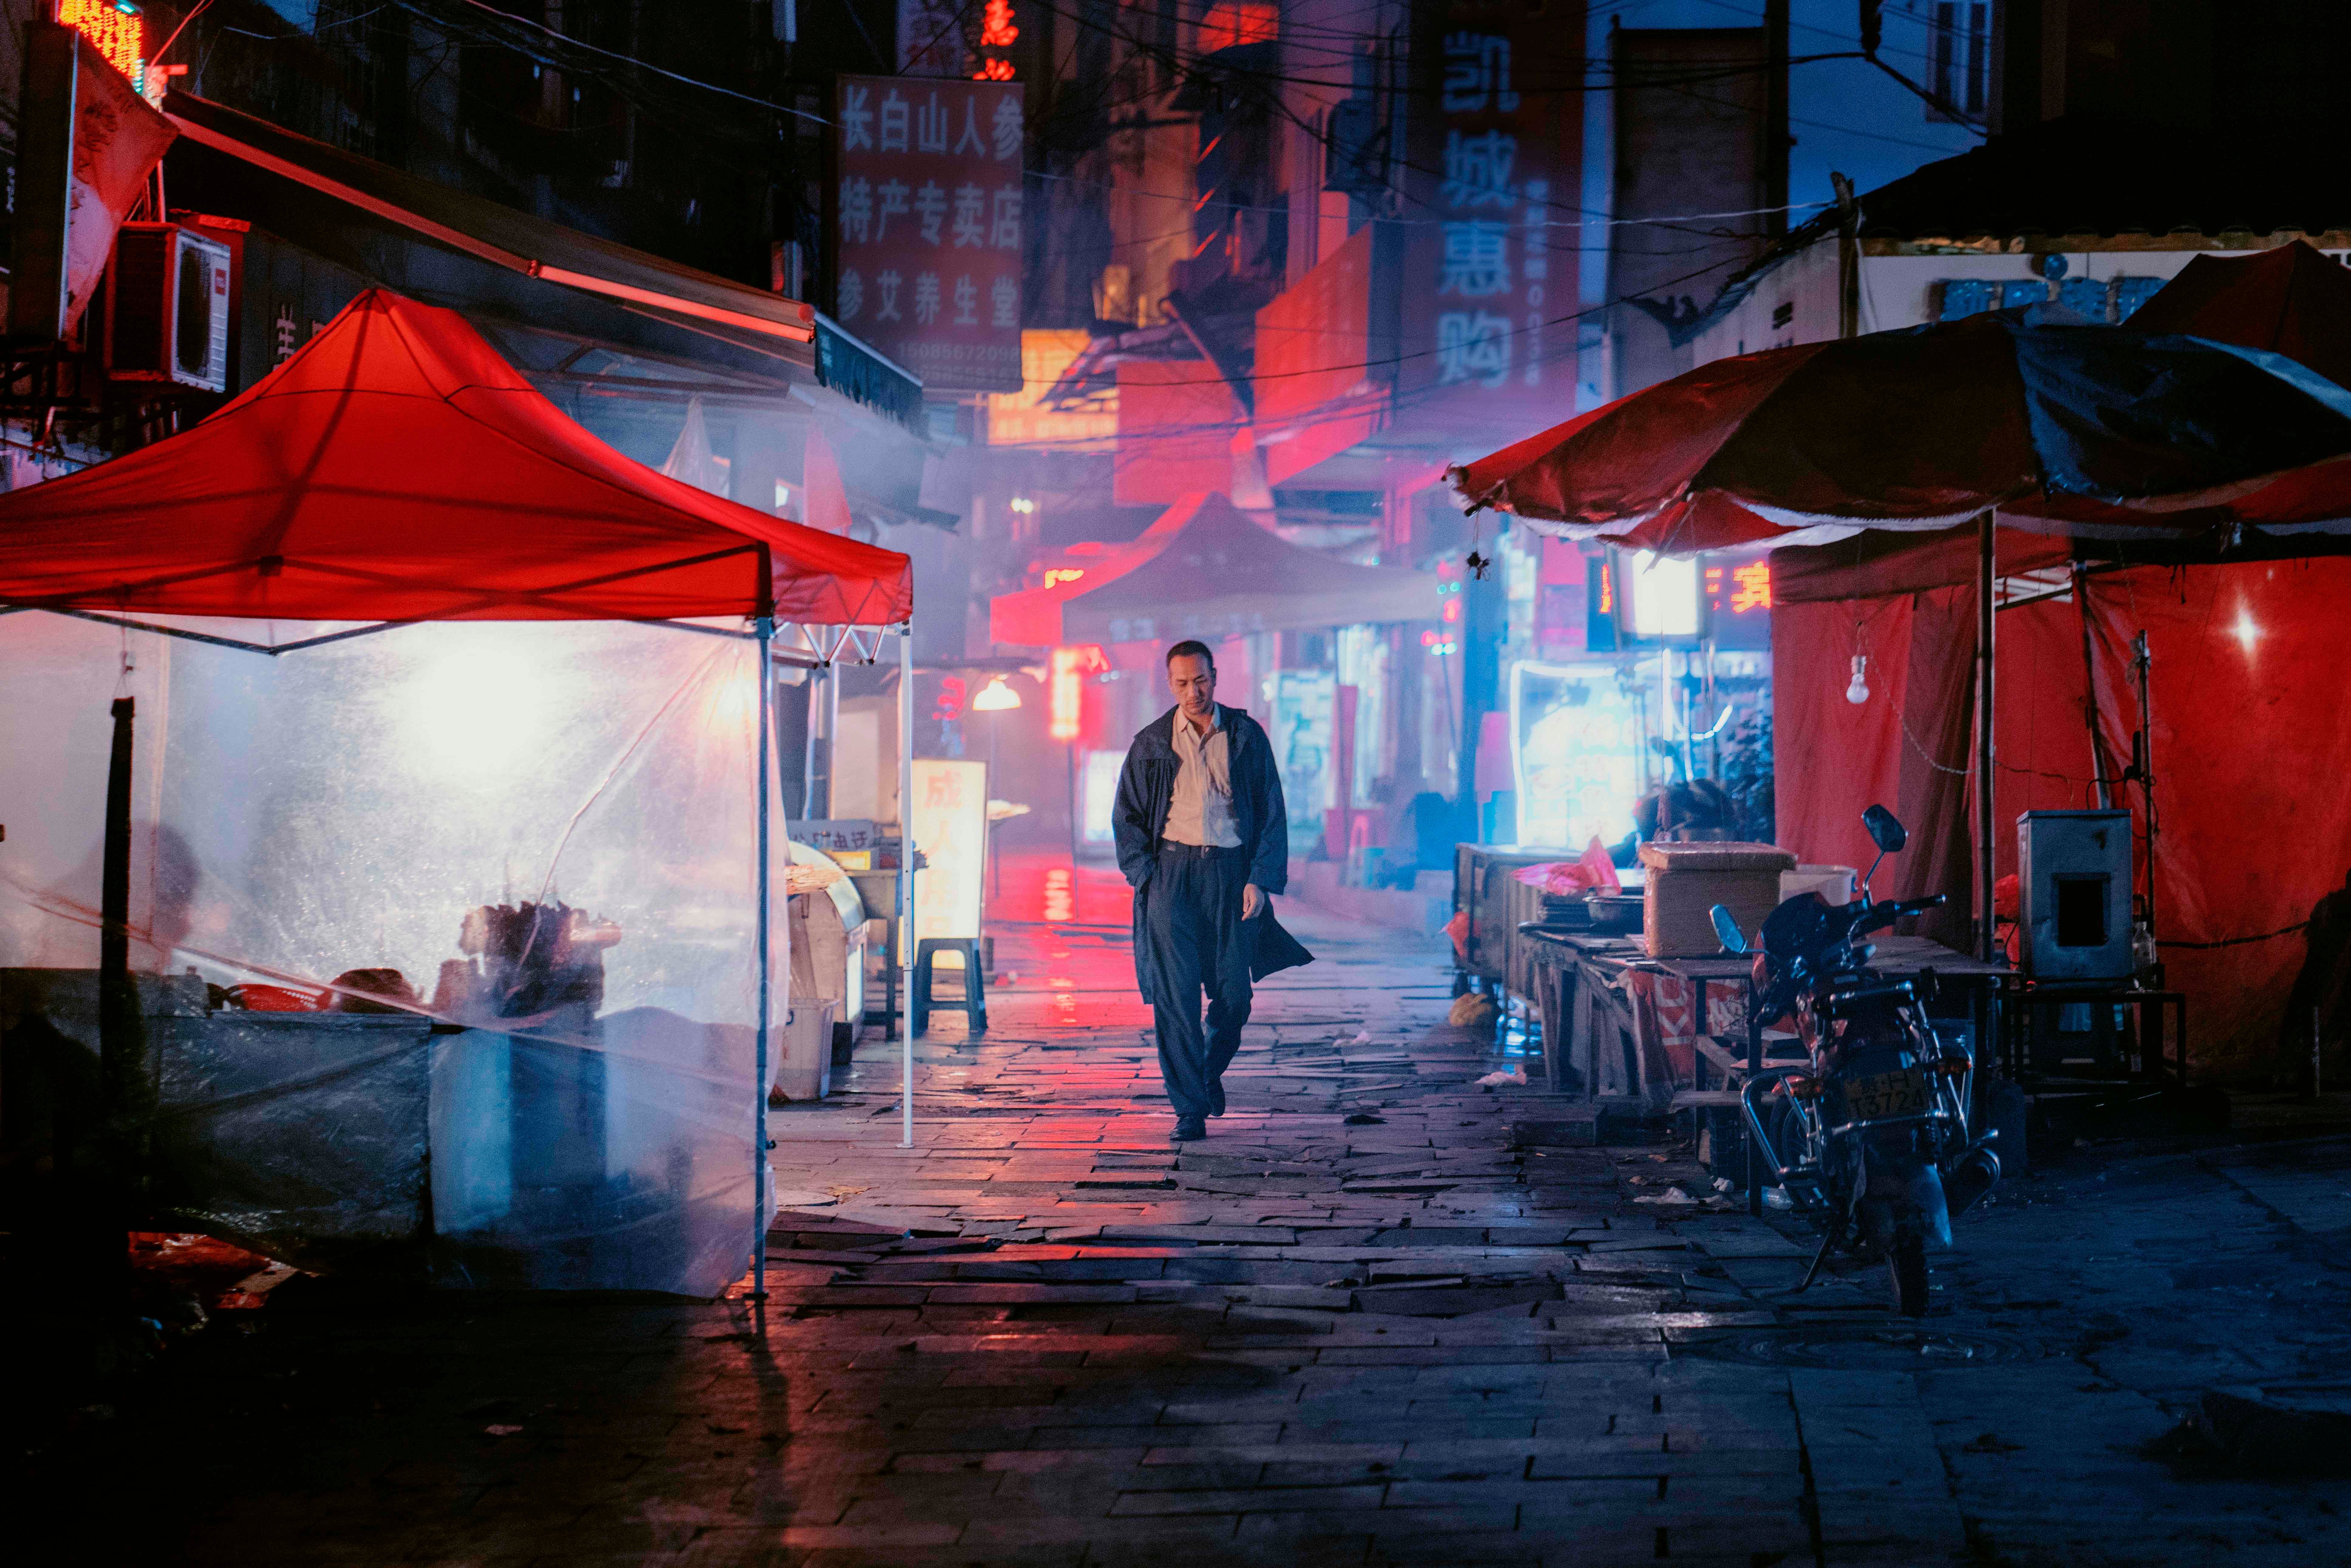 ‘Long Day’s Journey into Night’, a dream-like Chinese drama showing at the Barbican